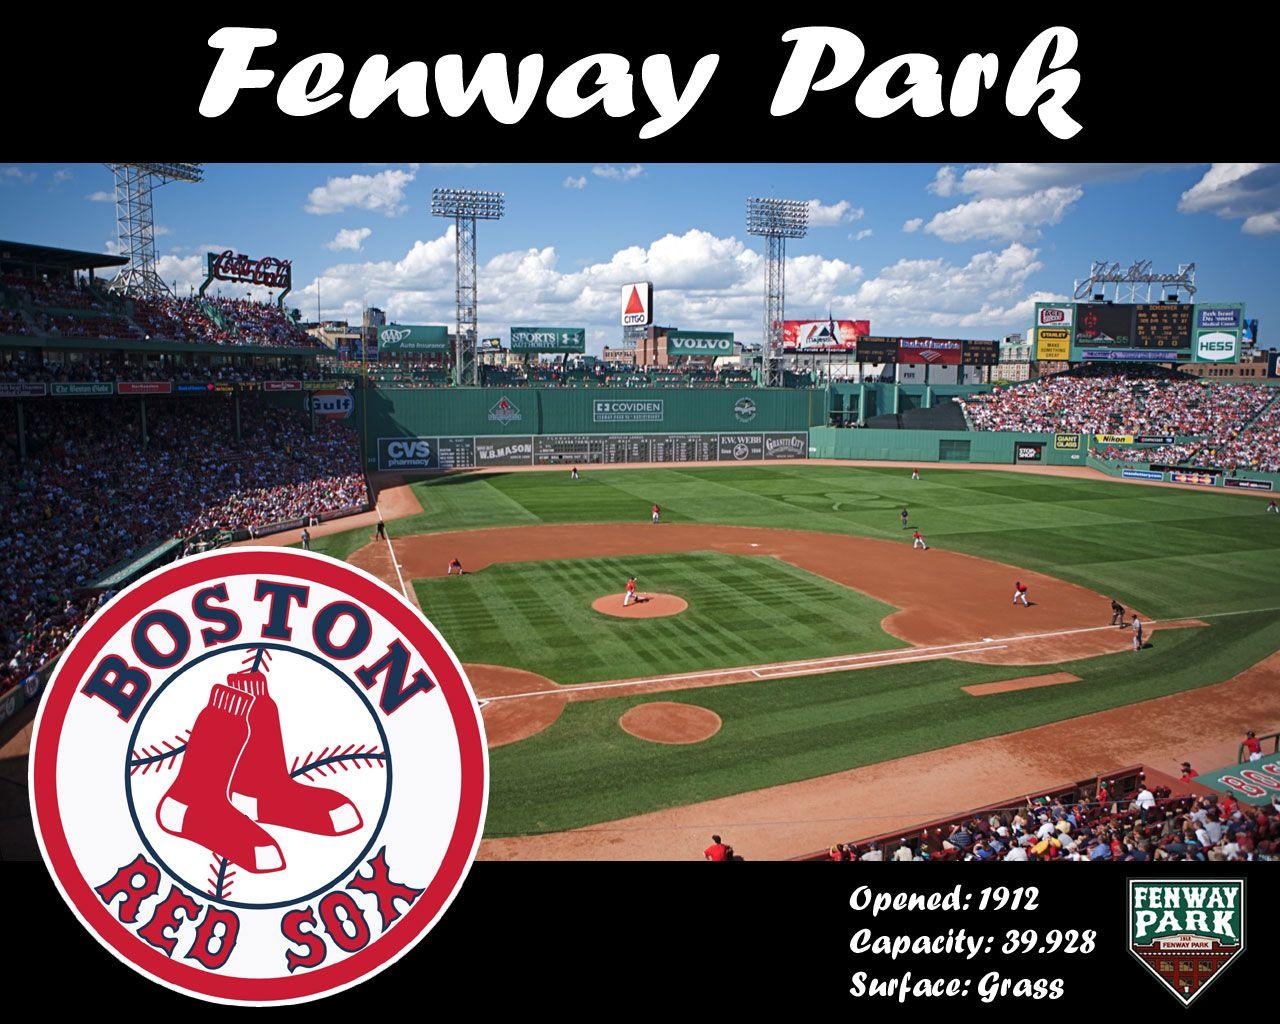 Favorite baseball team... grew up going to games at Fenway park